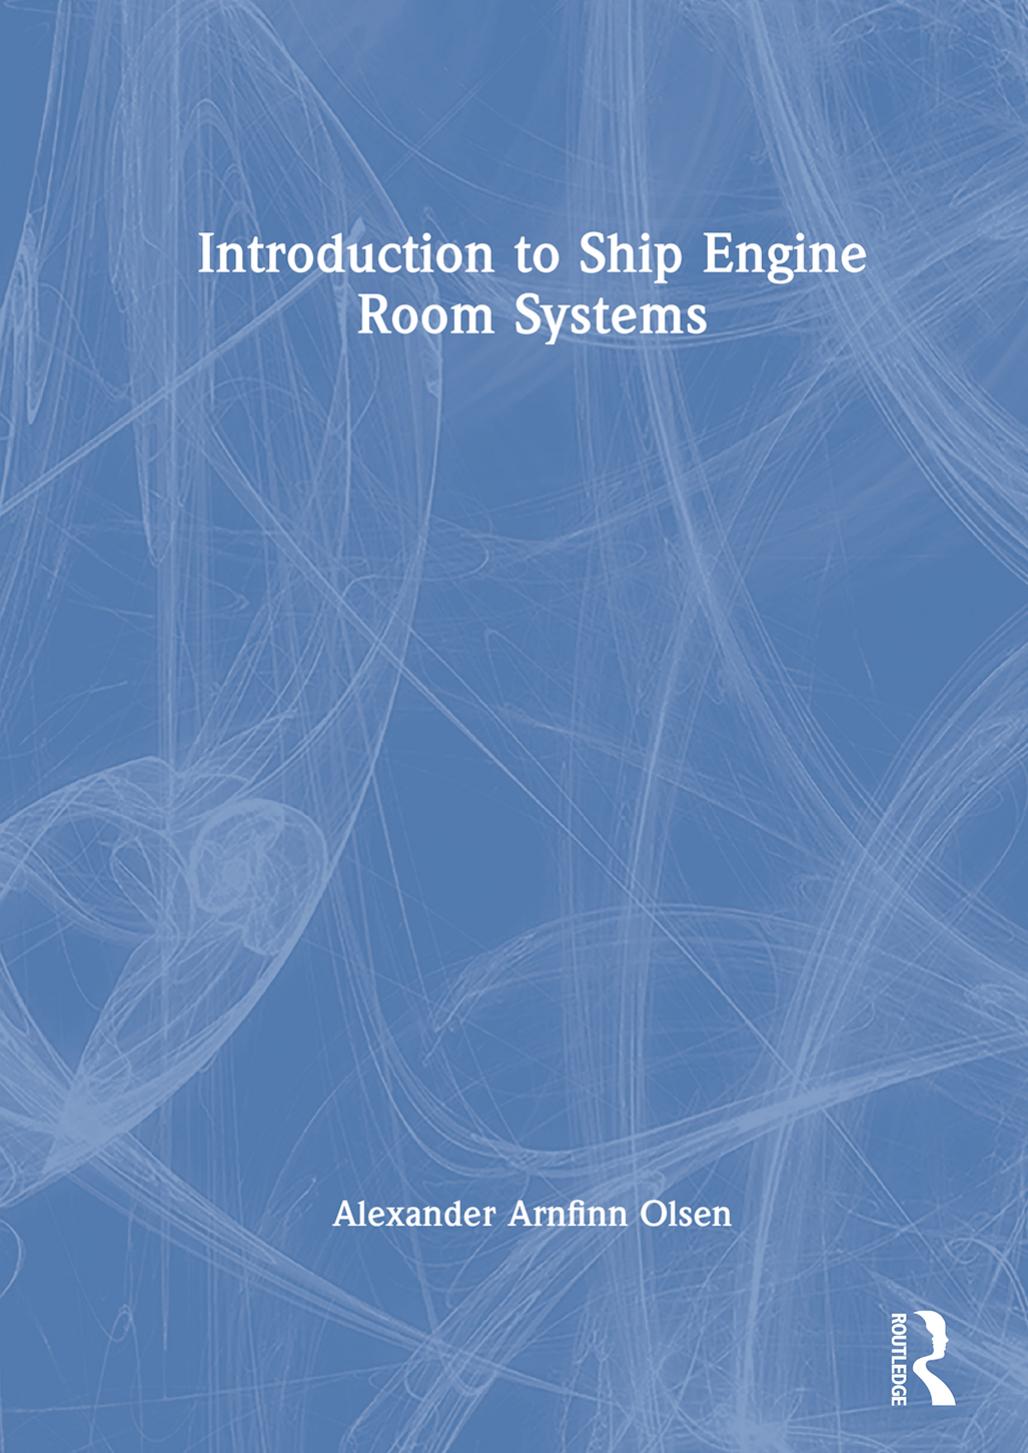 Introduction to Ship Engine Room Systems by Alexander Arnfinn Olsen